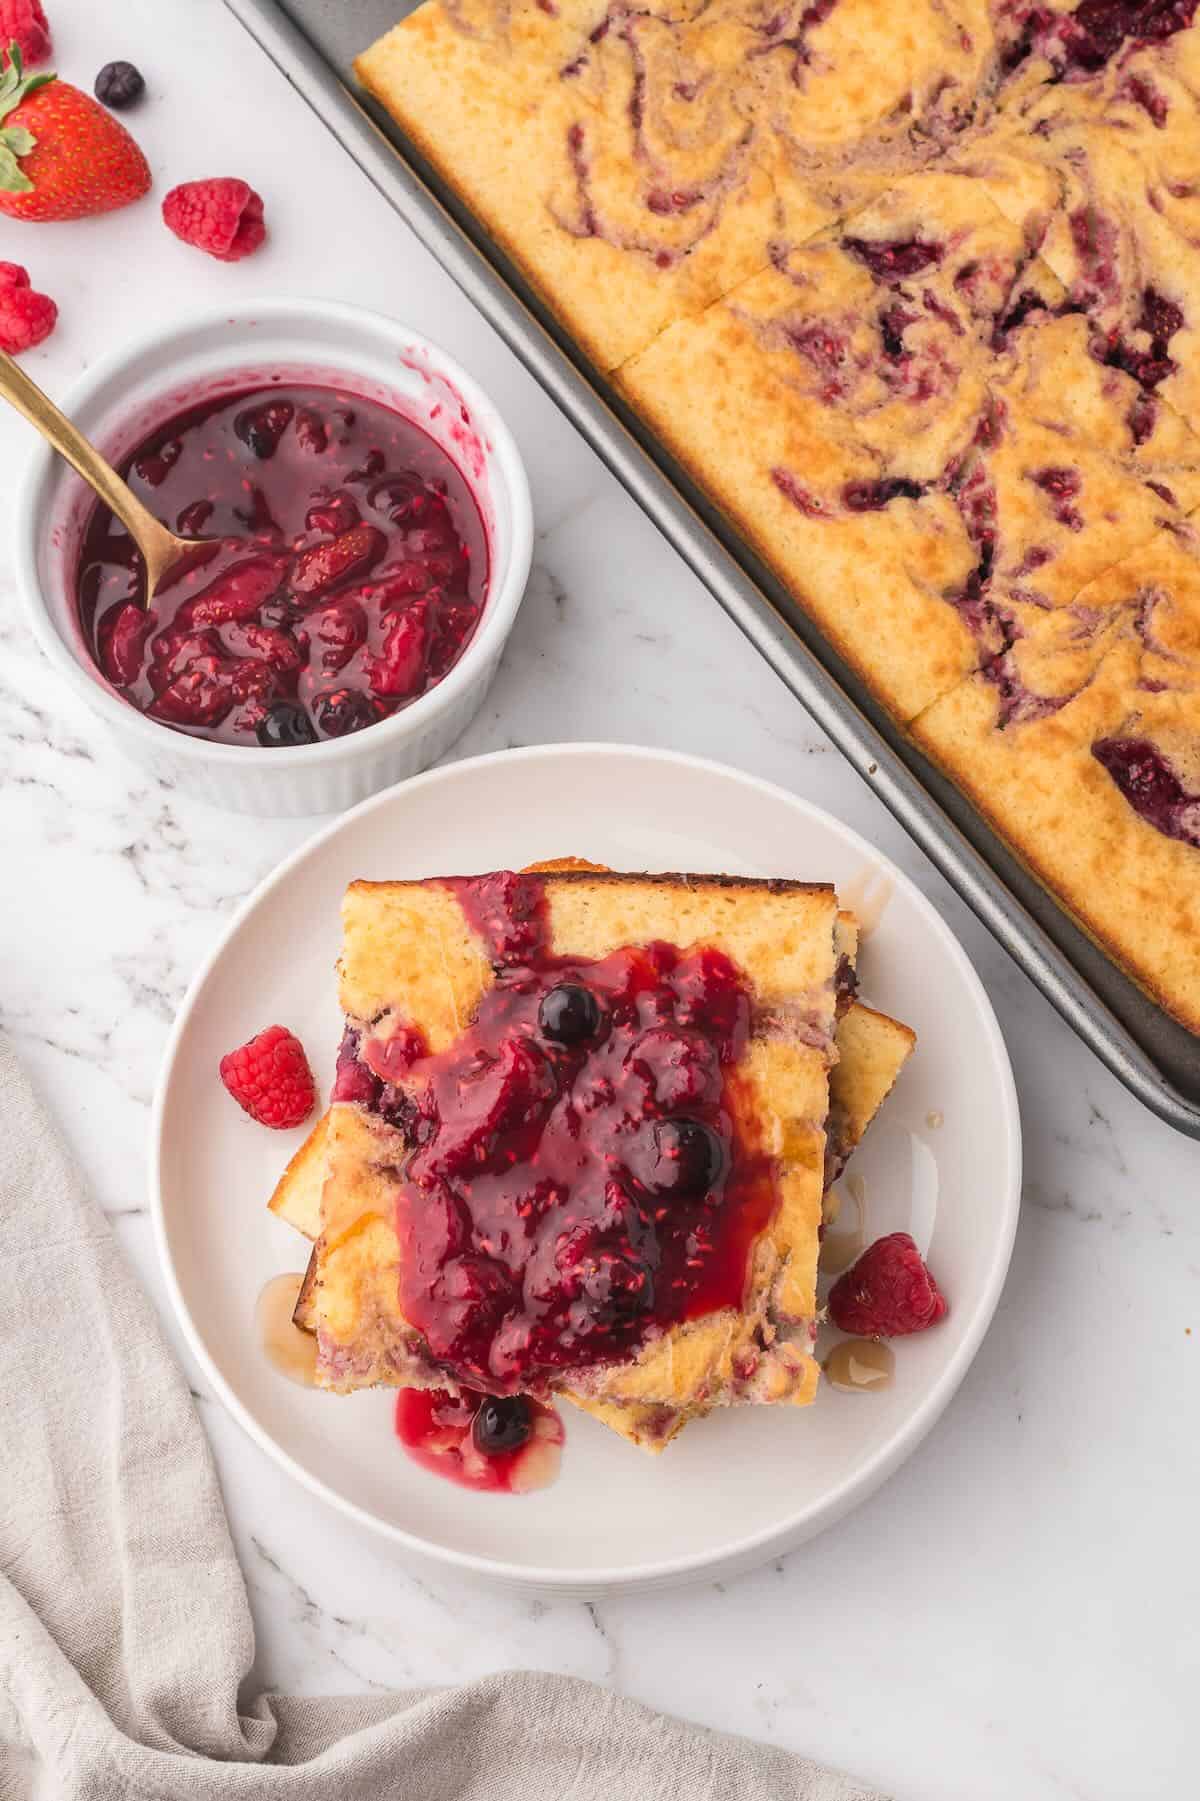 A stack of pancakes topped with berry compote, next to a sheet pan with pancakes/.